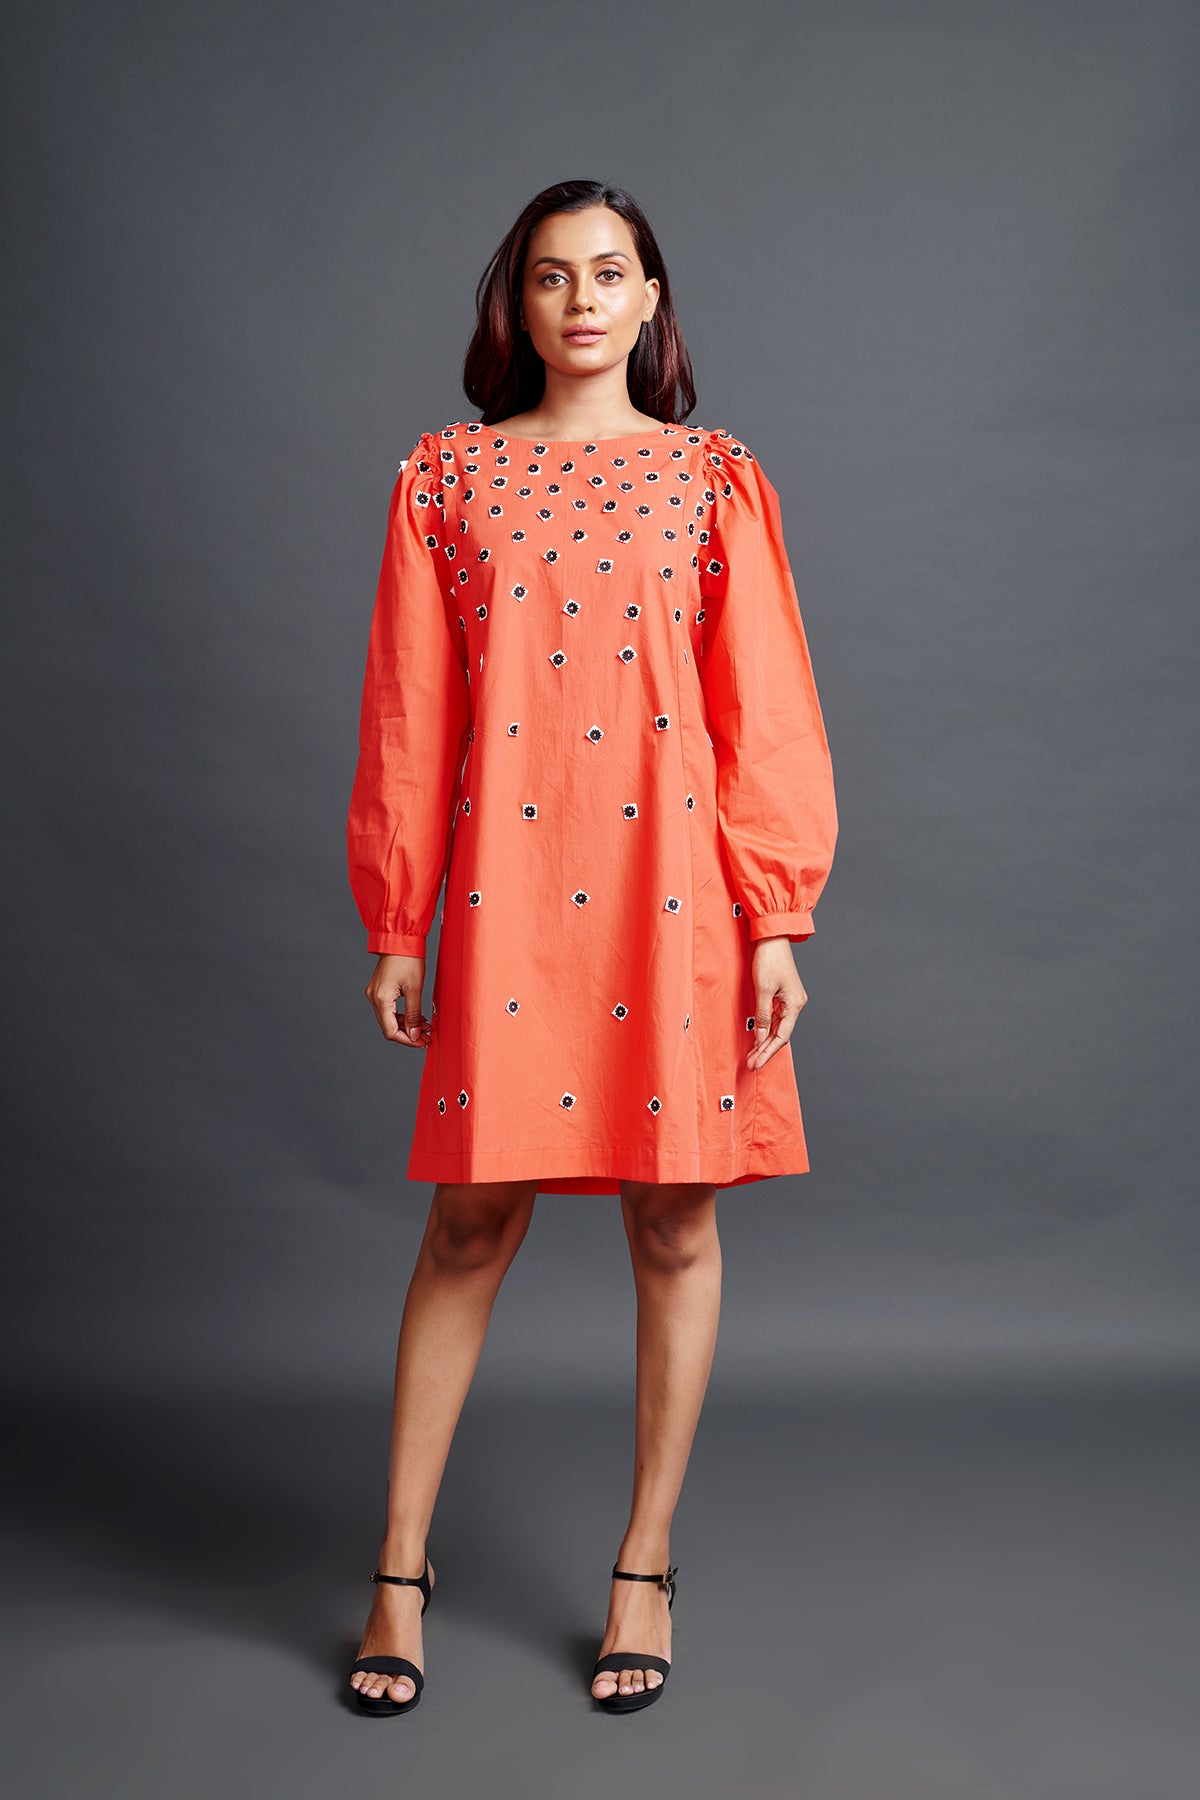 Image of ORANGE A-LINE DRESS IN COTTON BASE WITH EMBROIDERY AND BACK KNOT DETAIL. From savoirfashions.com